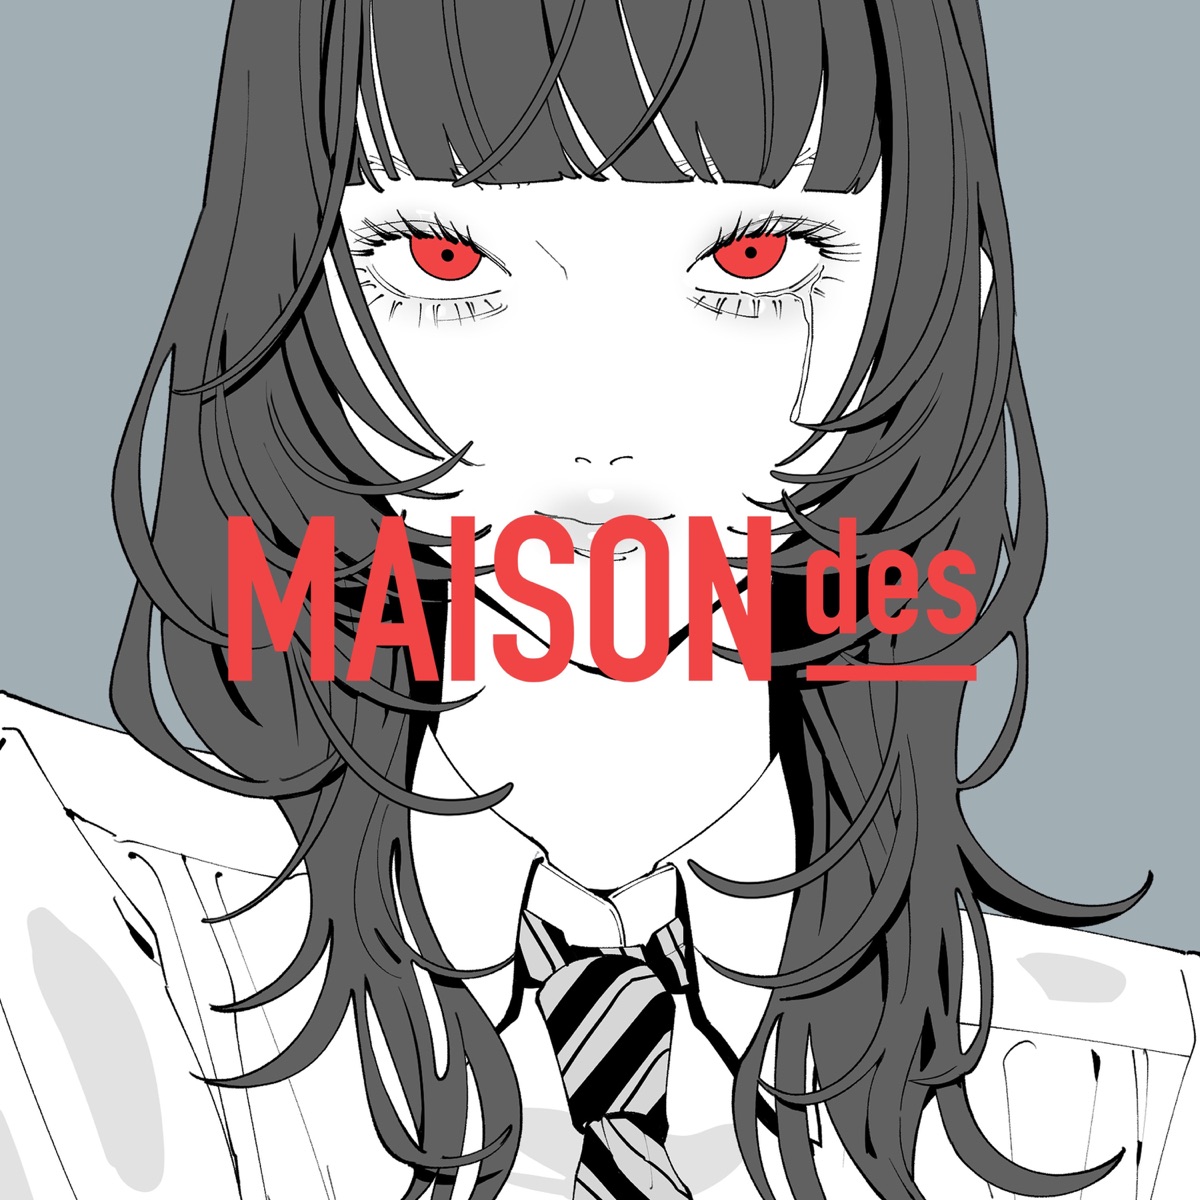 Cover art for『MAISONdes - 湿っぽいね feat. 相沢, 式浦躁吾』from the release『you were wet feat. Aizawa, shikiura sogo